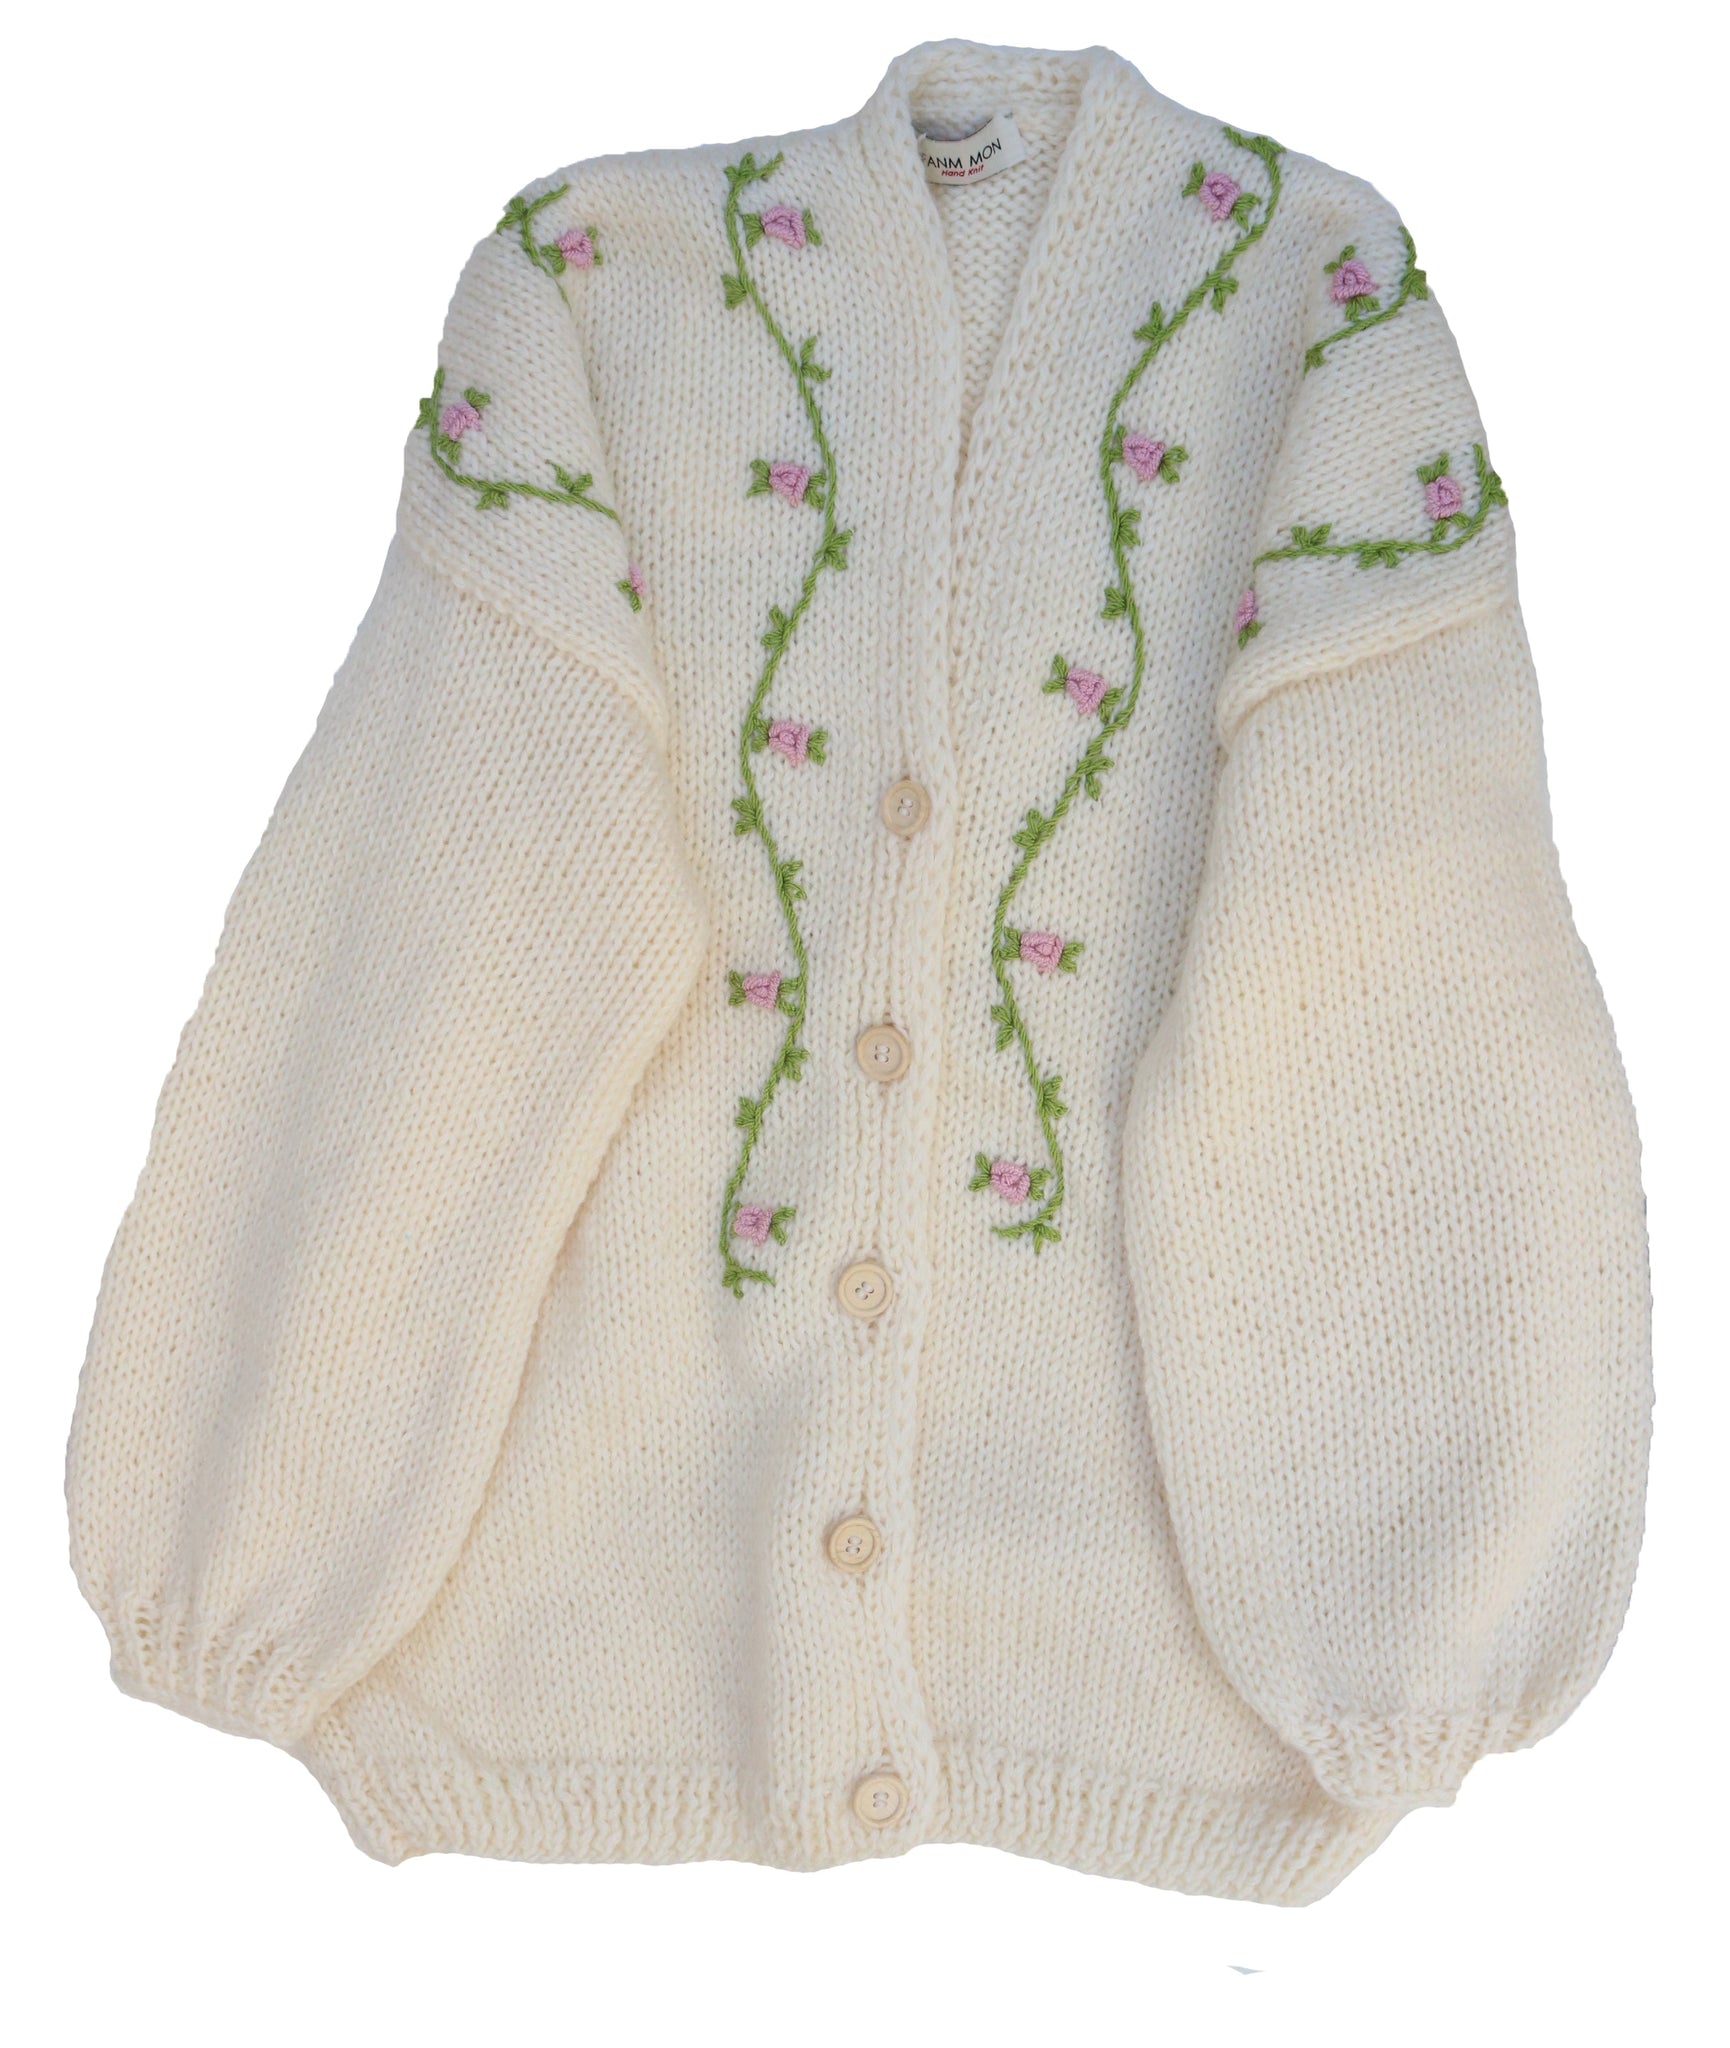 JASMIN BLOOM Button Front Wool Cardigan by Fanm Mon